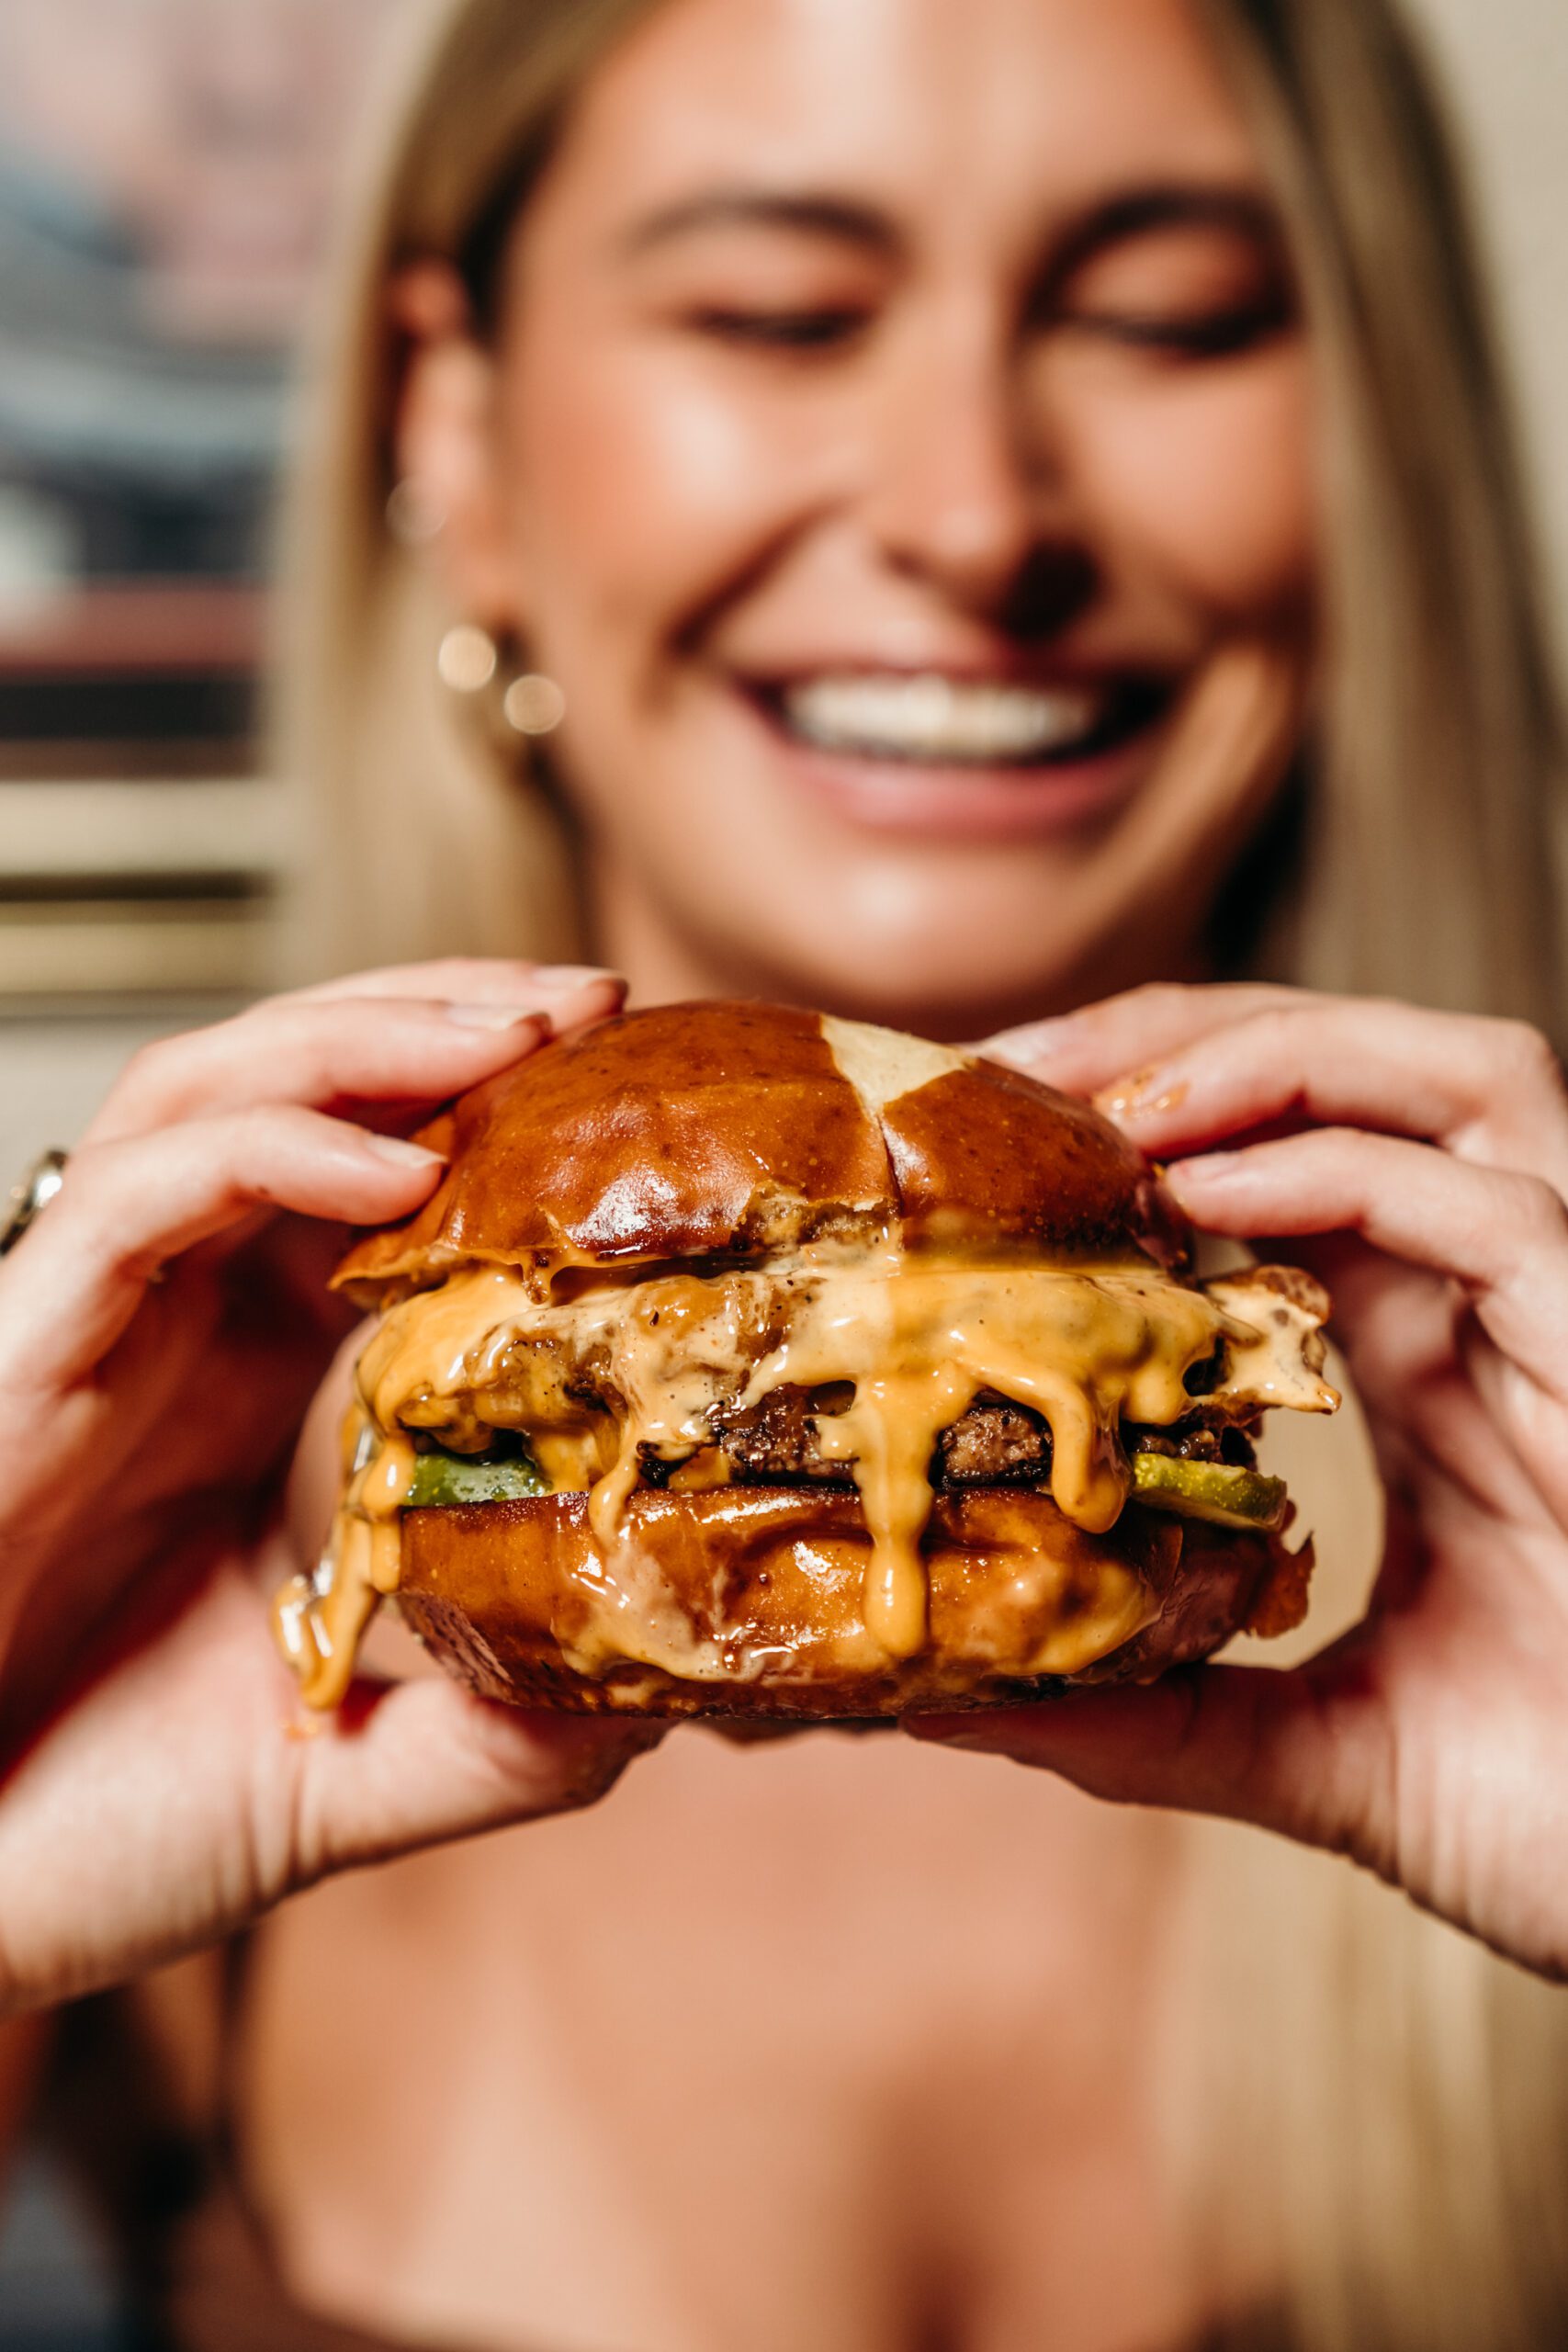 Smiling woman is holding a burger.